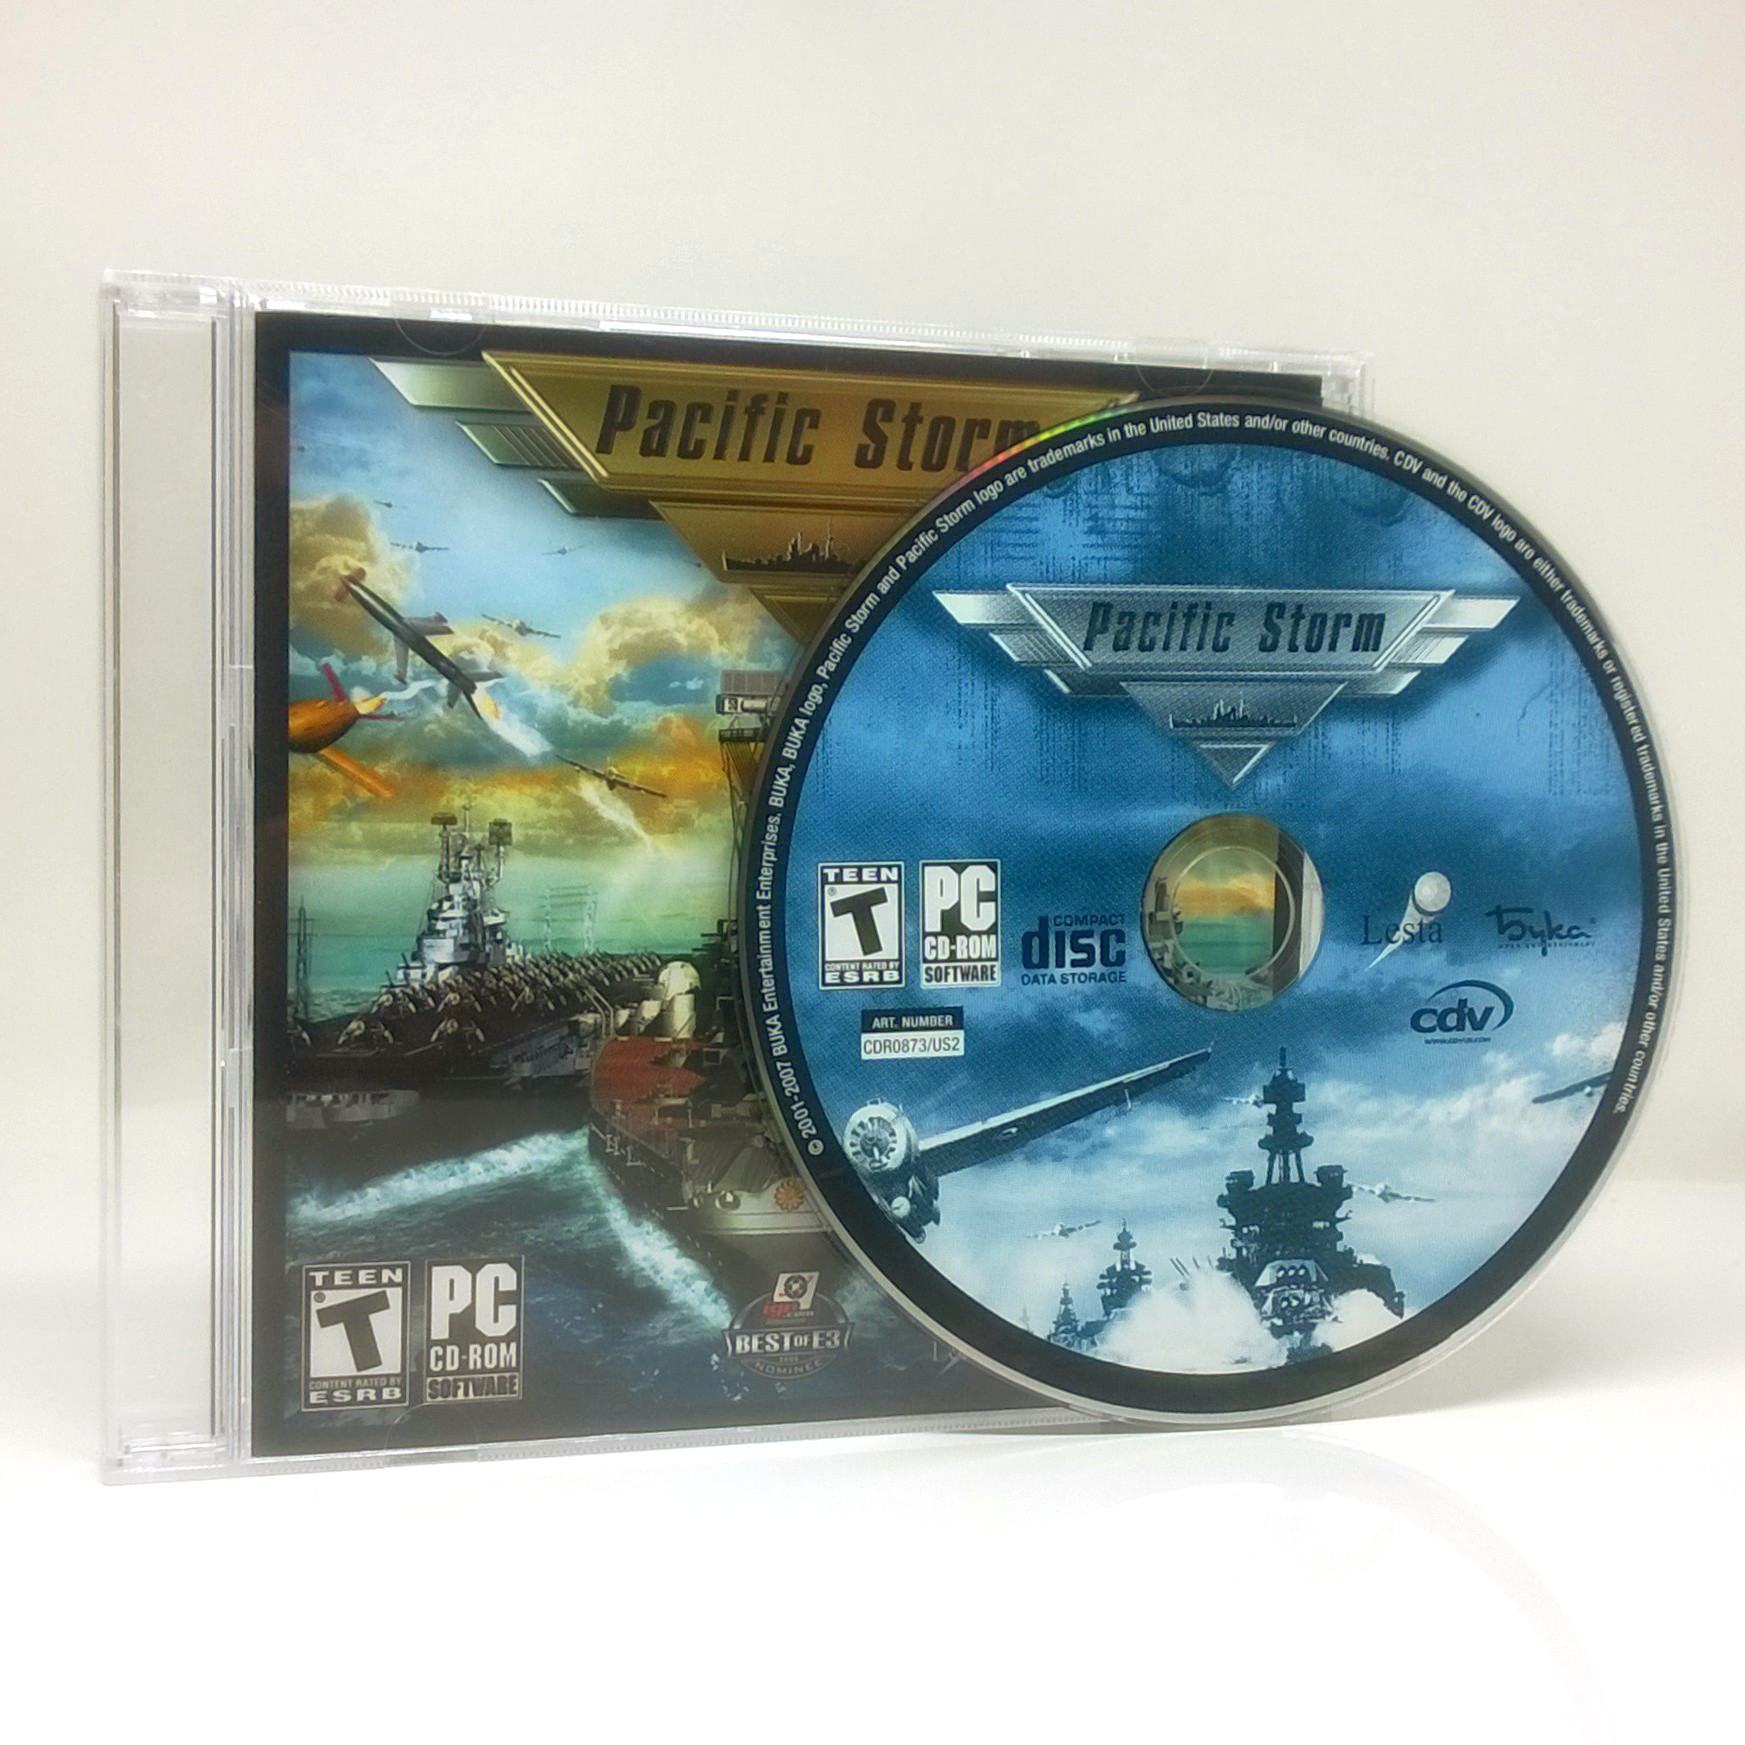 Pacific Storm PC CD-ROM Game